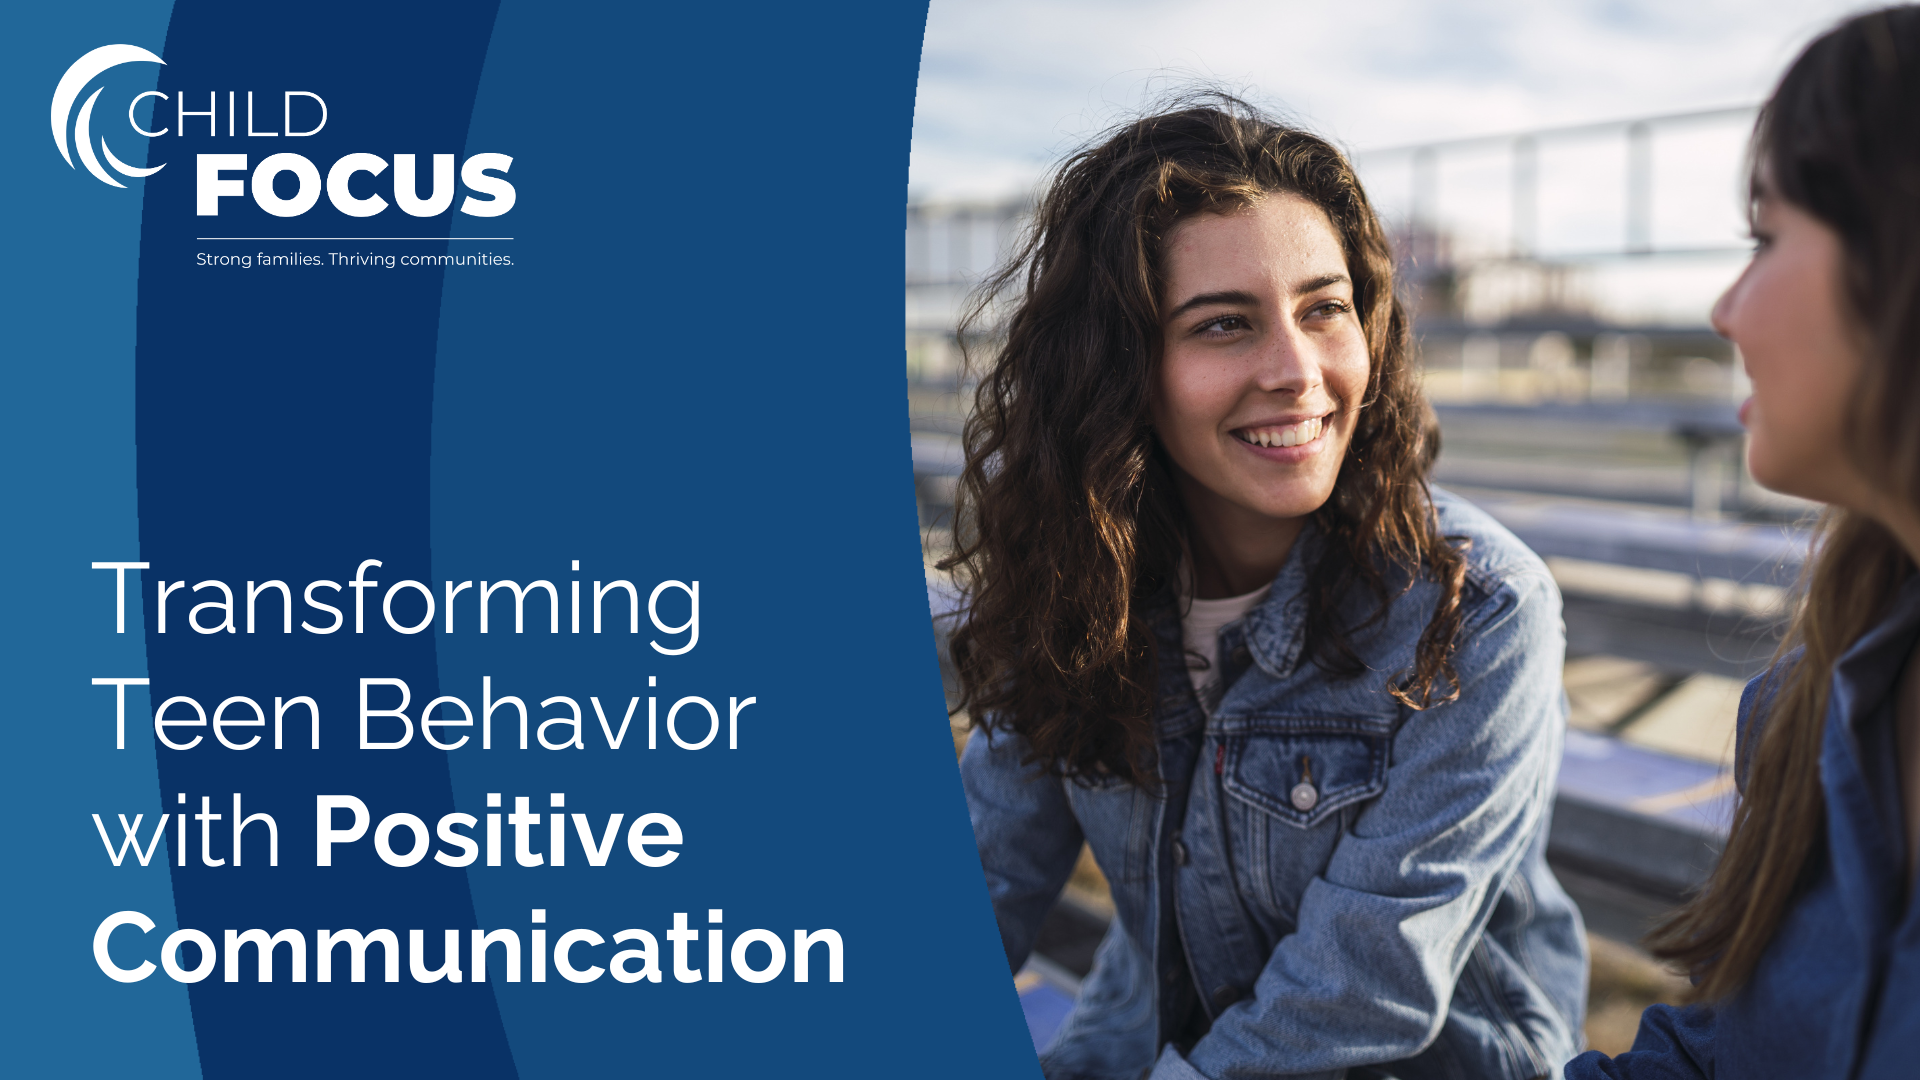 A woman smiling and talking. The text reads, "Transforming Teen Behavior with Positive Communication" 